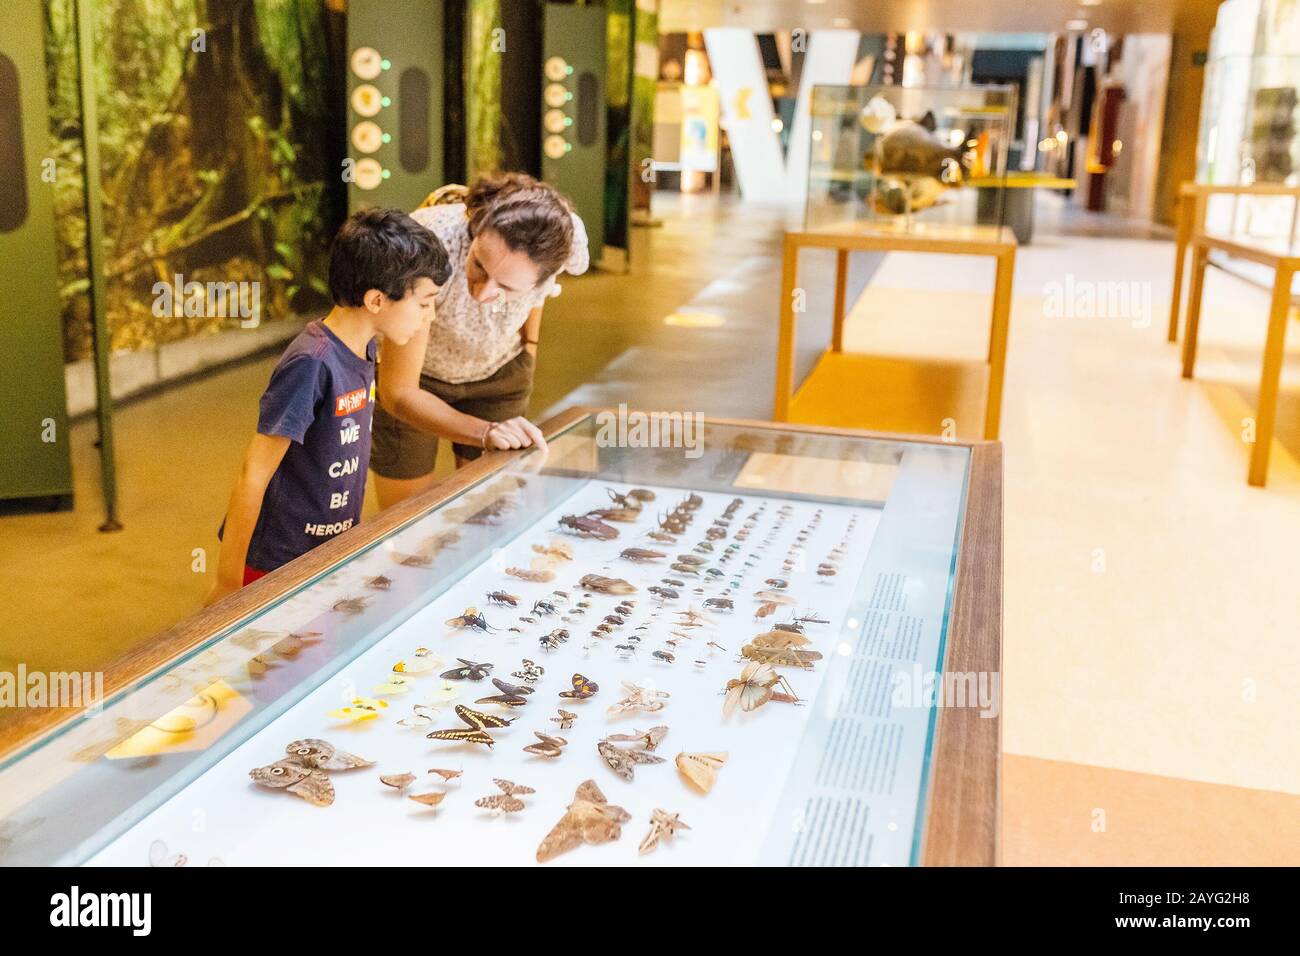 28 JULY 2018, BARCELONA, SPAIN: Visitors walk in the Cosmocaixa Museum in natural history section Stock Photo